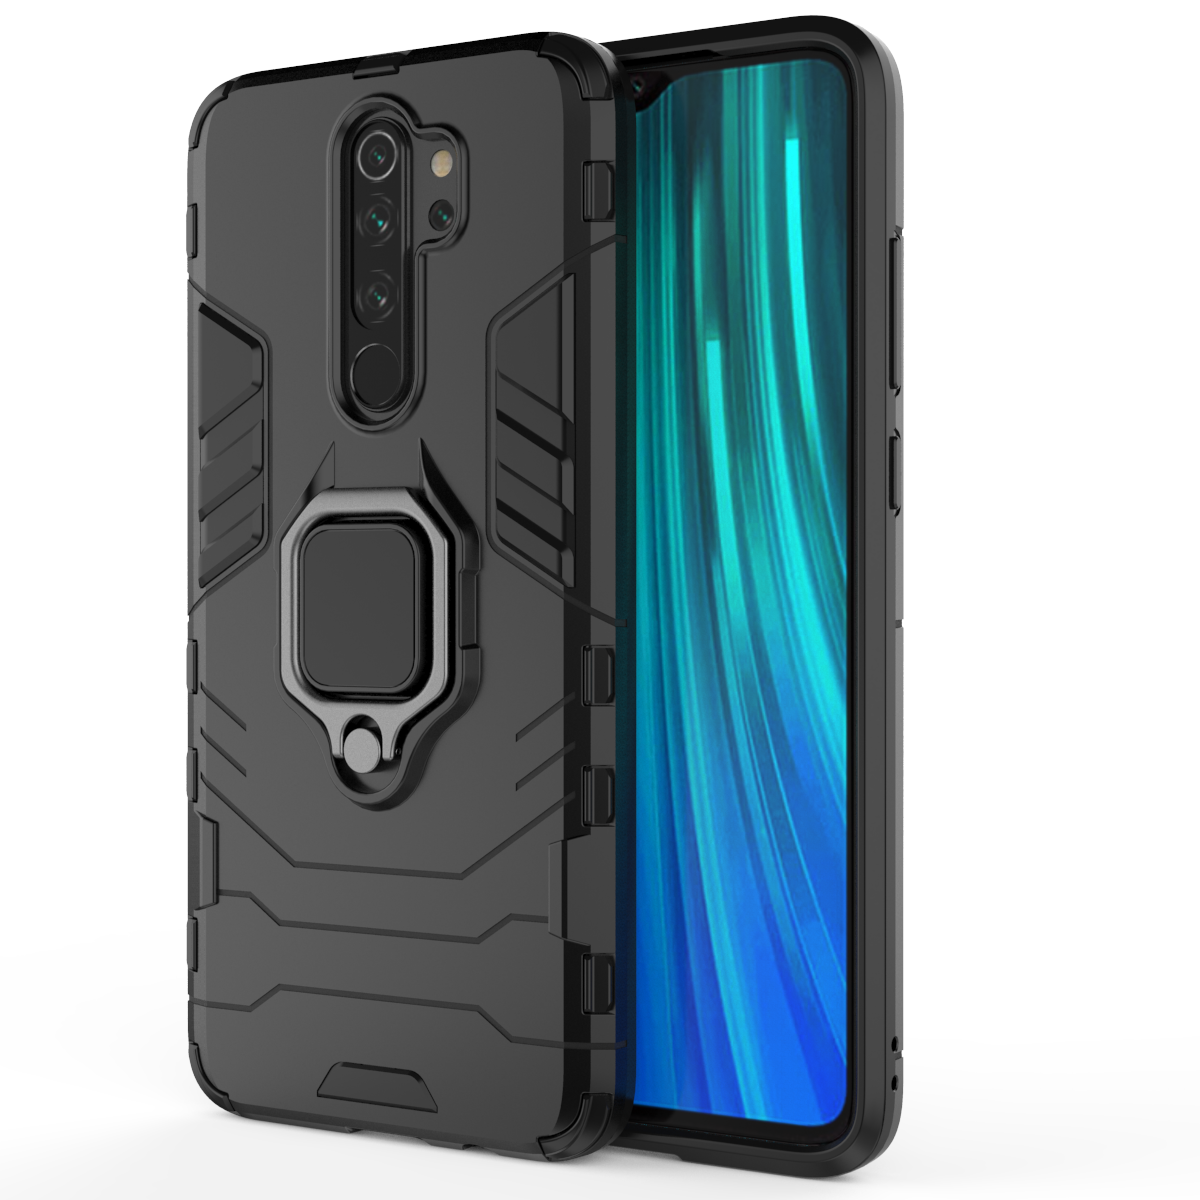 Bakeey Armor Shockproof Magnetic with 360 Rotation Finger Ring Holder Stand PC Protective Case for Xiaomi Redmi 9 Non-original COD